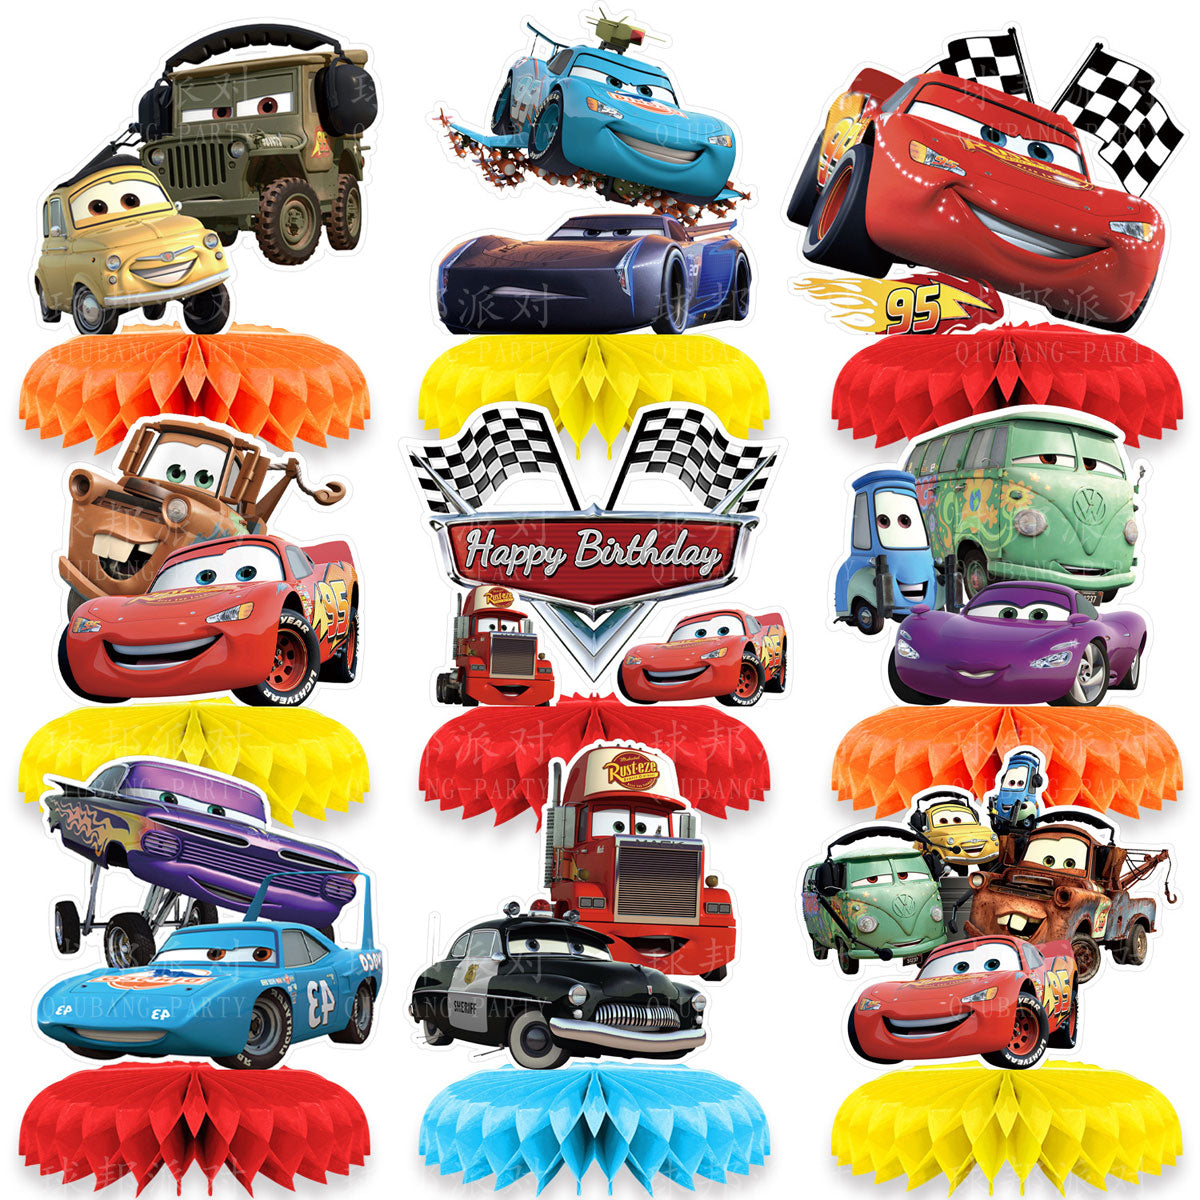 Cars Table Decorating Kit to decorate your dessert table for a marvellous birthday party!